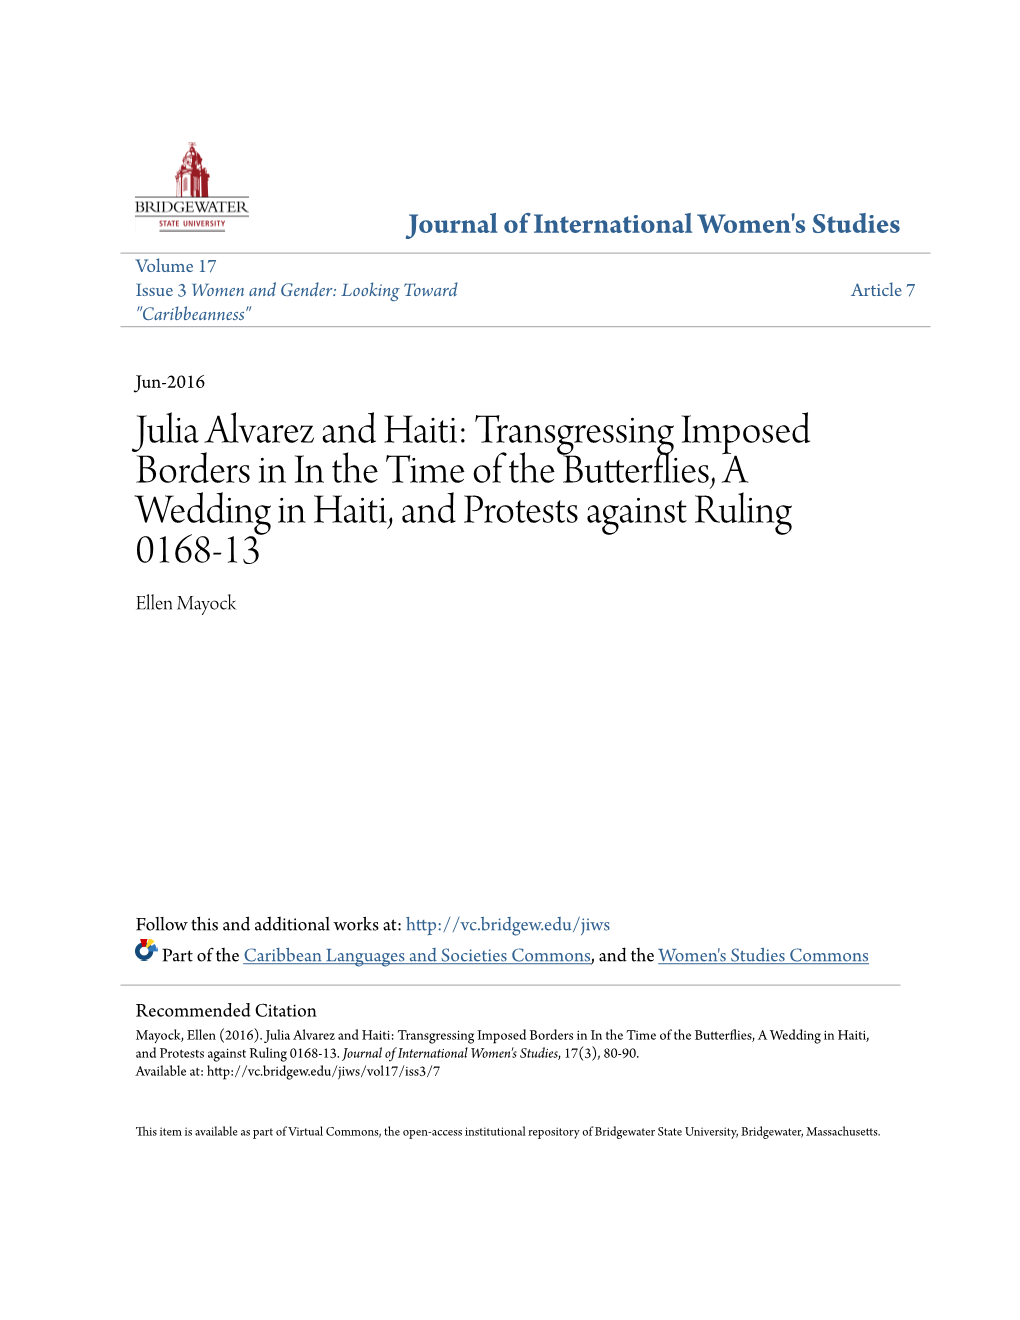 Julia Alvarez and Haiti: Transgressing Imposed Borders in in the Time of the Butterflies, a Wedding in Haiti, and Protests Against Ruling 0168-13 Ellen Mayock